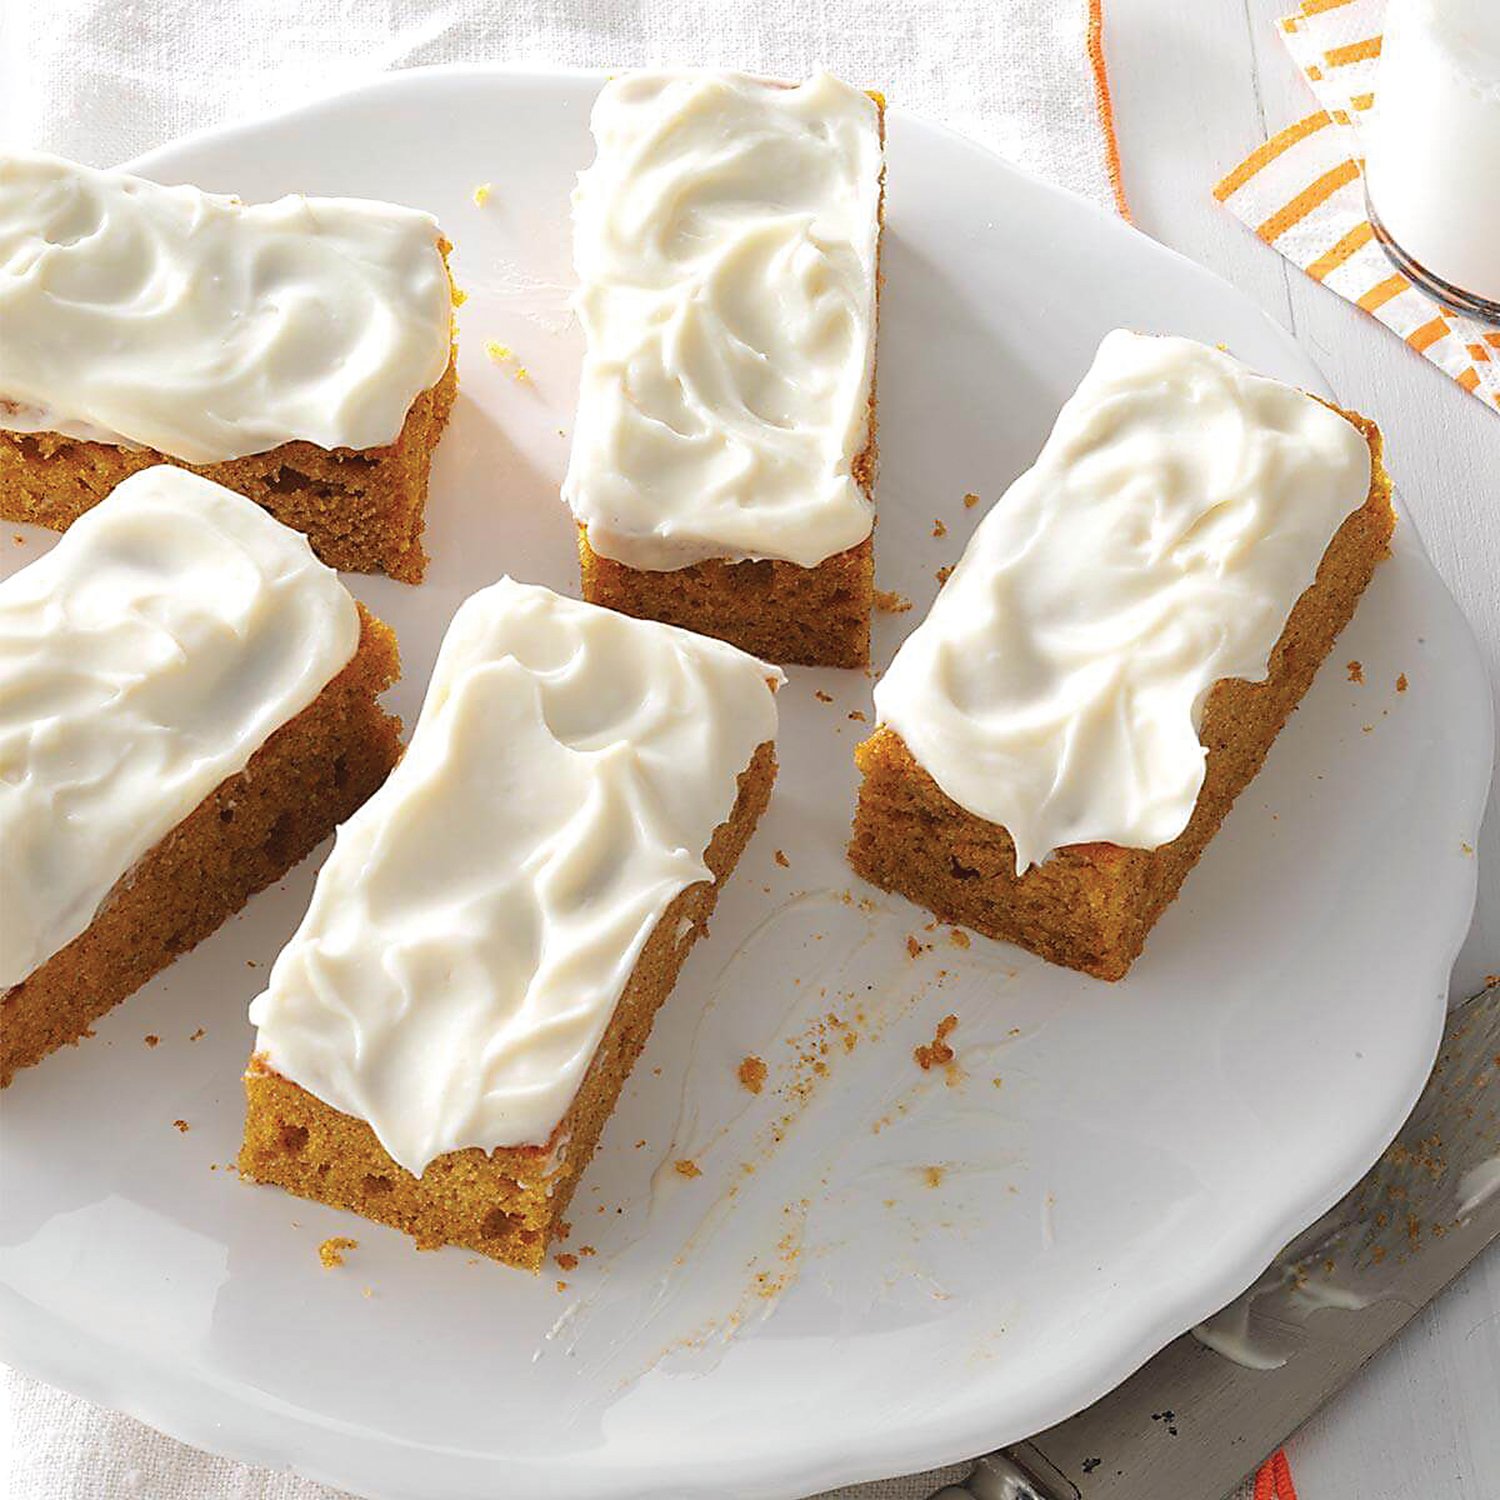 Pumpkin Bars have all the flavor of pumpkin pie, plus cream cheese frosting on top. Photograph by Tasteofhome.com